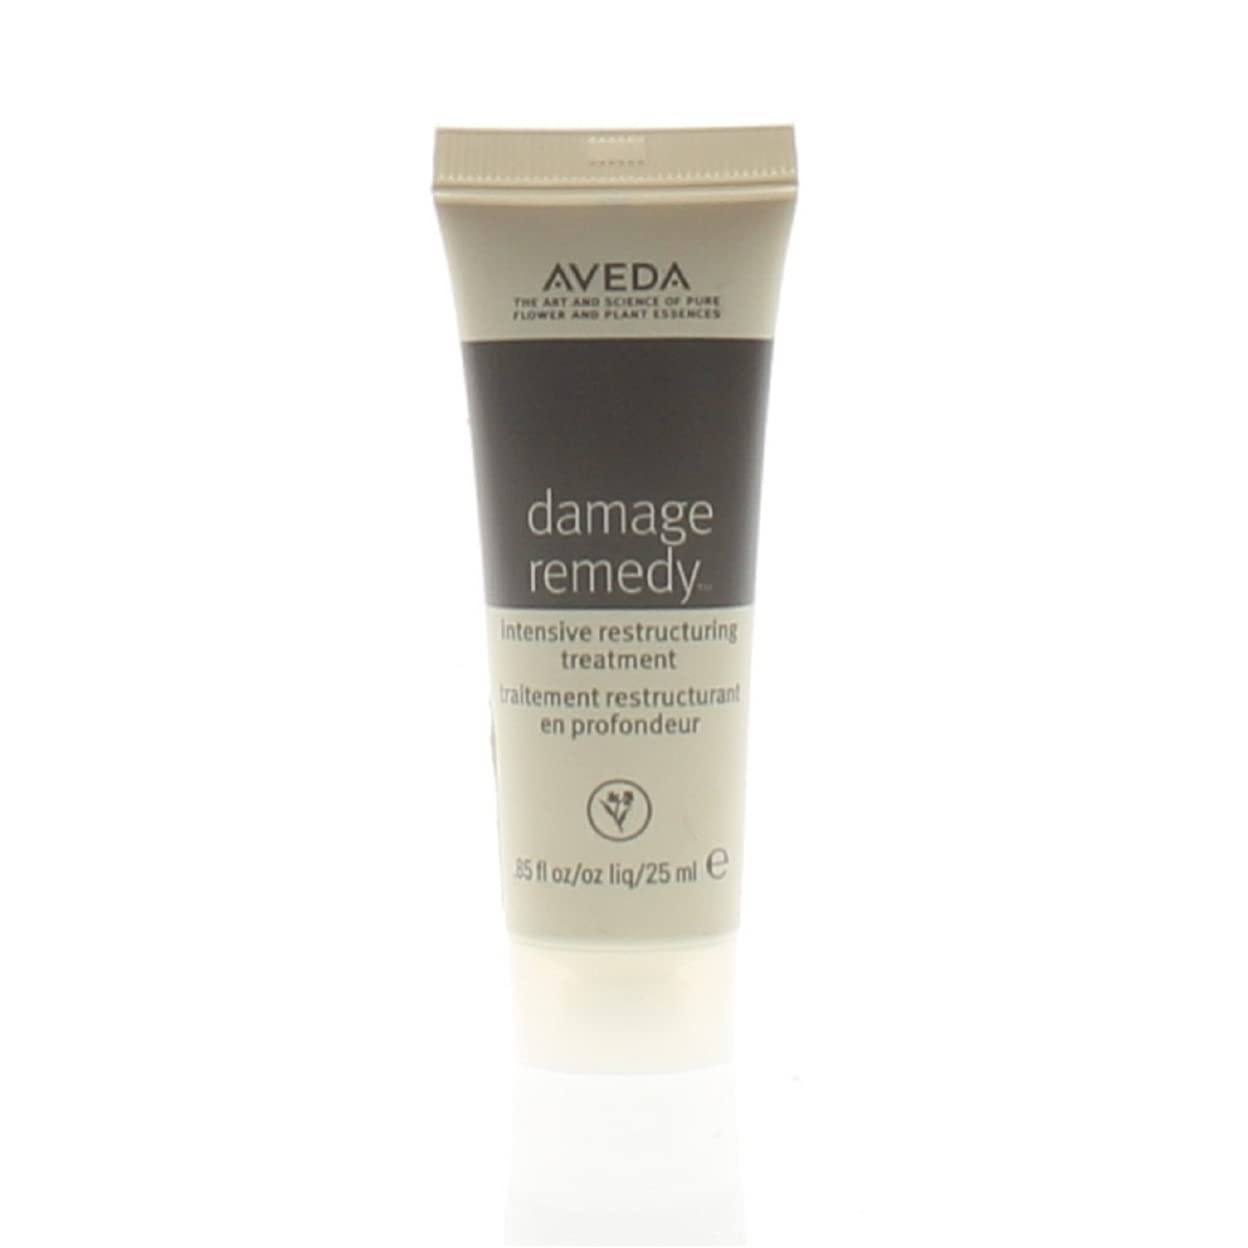 AVEDA Damage Remedy Intensive Restructuring Treatment Travel Size 25 ml